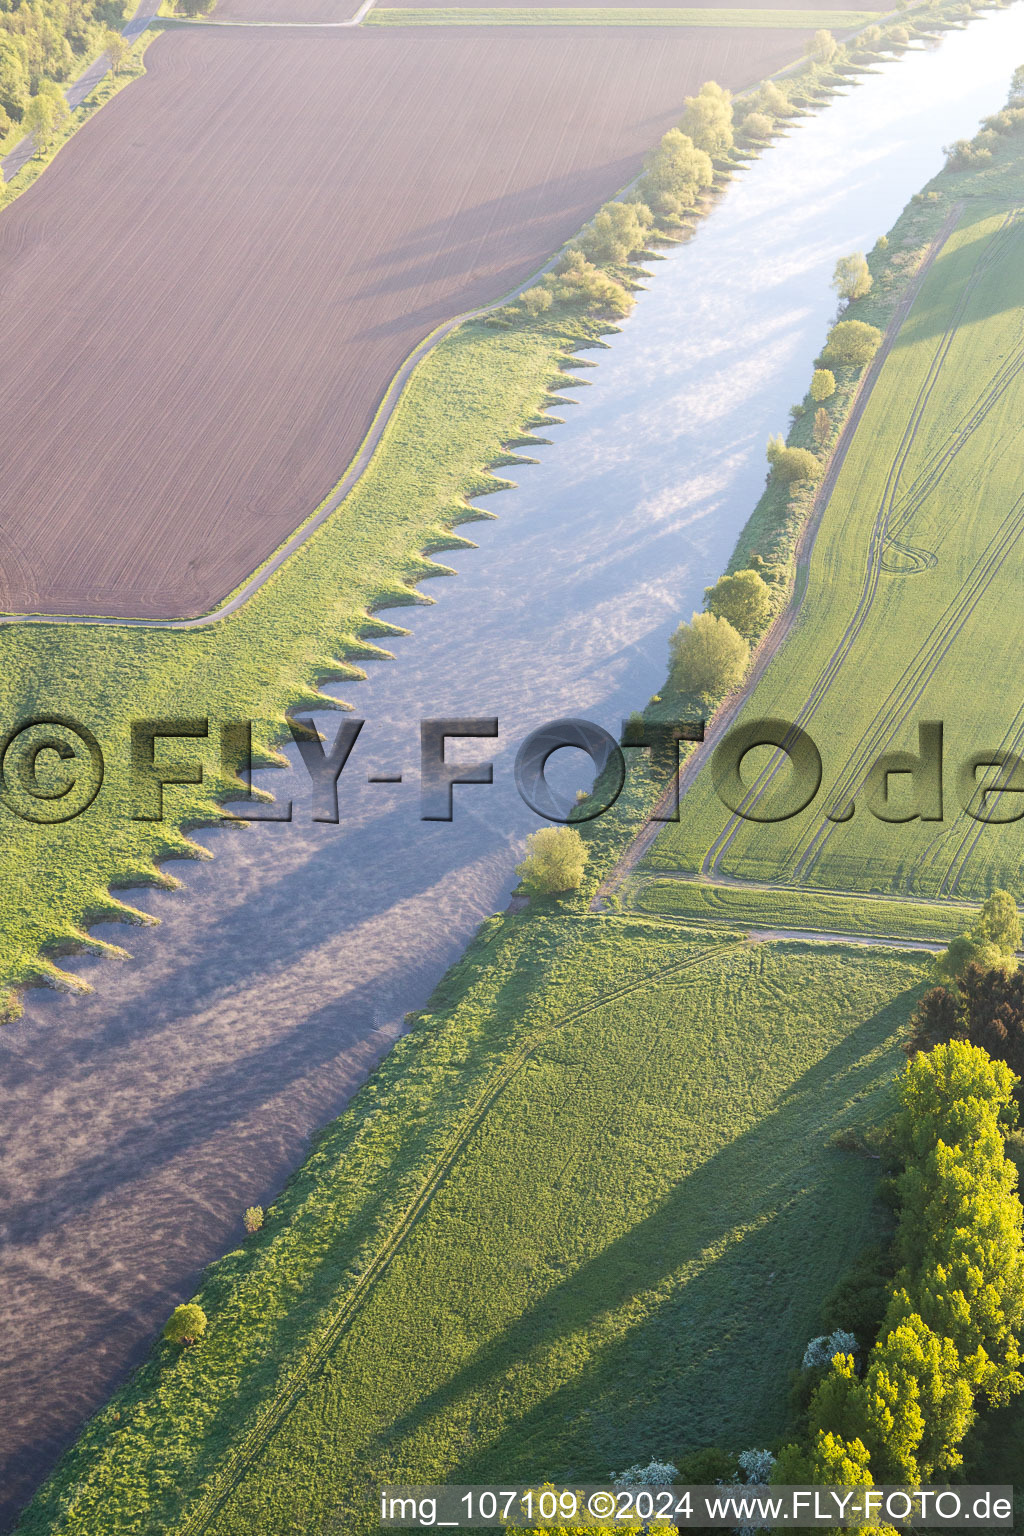 Stahle in the state North Rhine-Westphalia, Germany from above